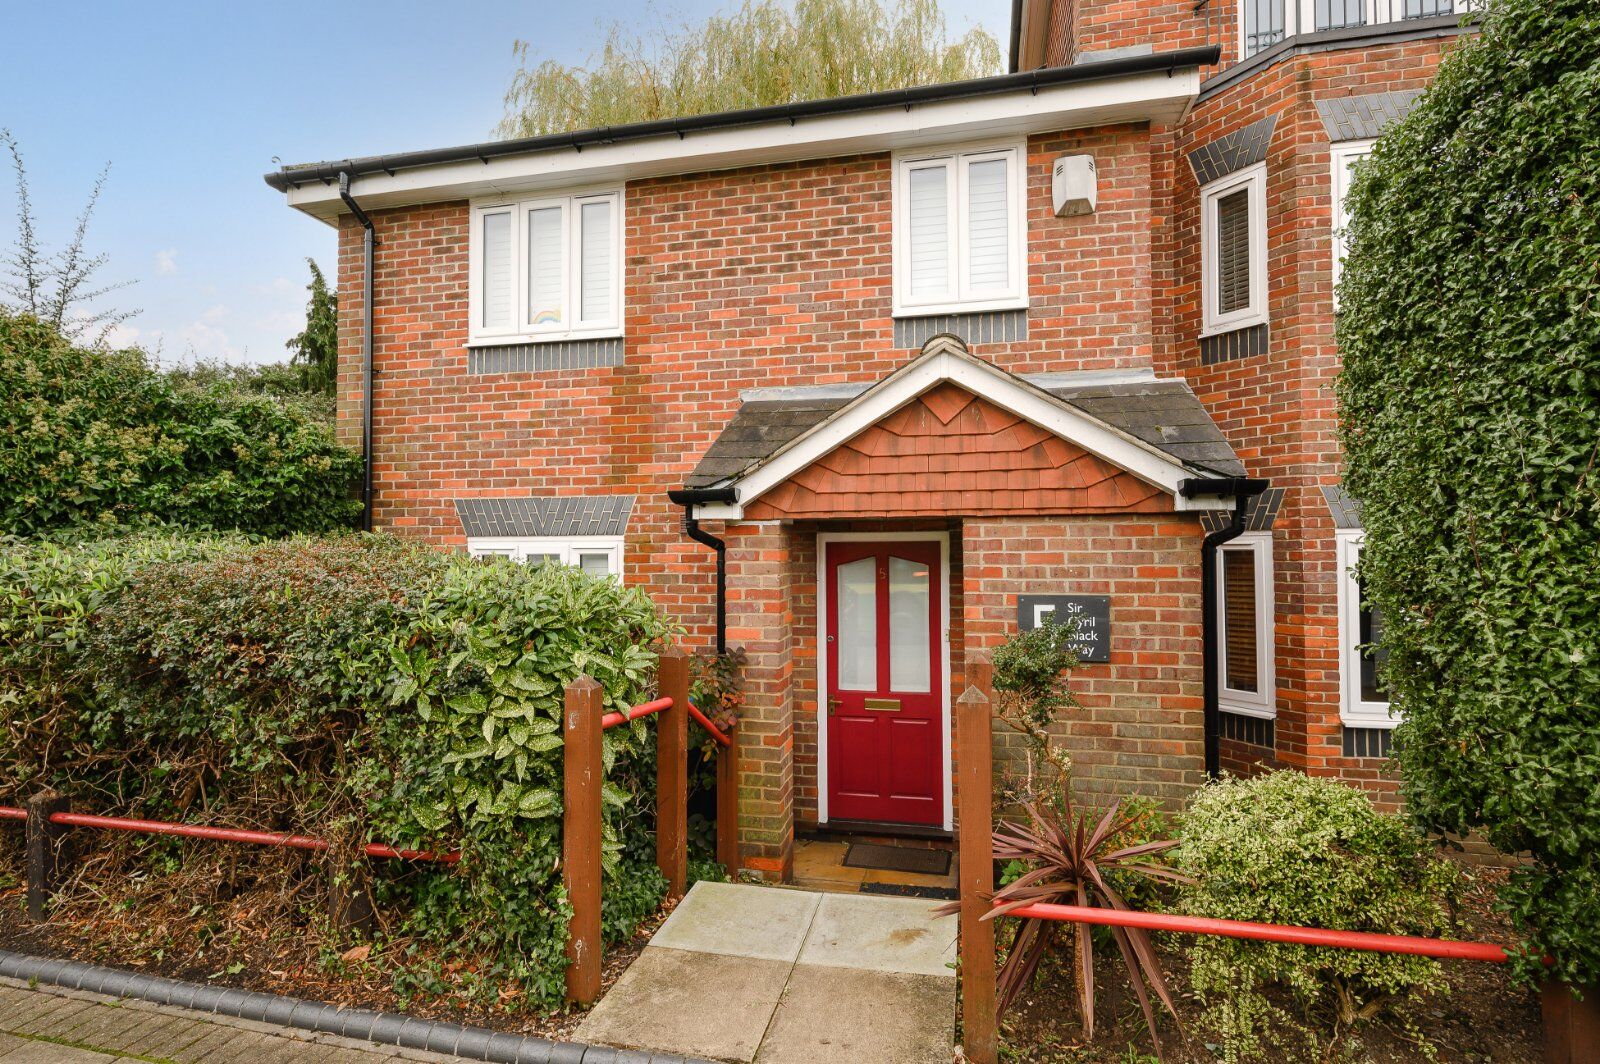 3 bedroom semi detached house for sale Sir Cyril Black Way, Wimbledon, SW19, main image